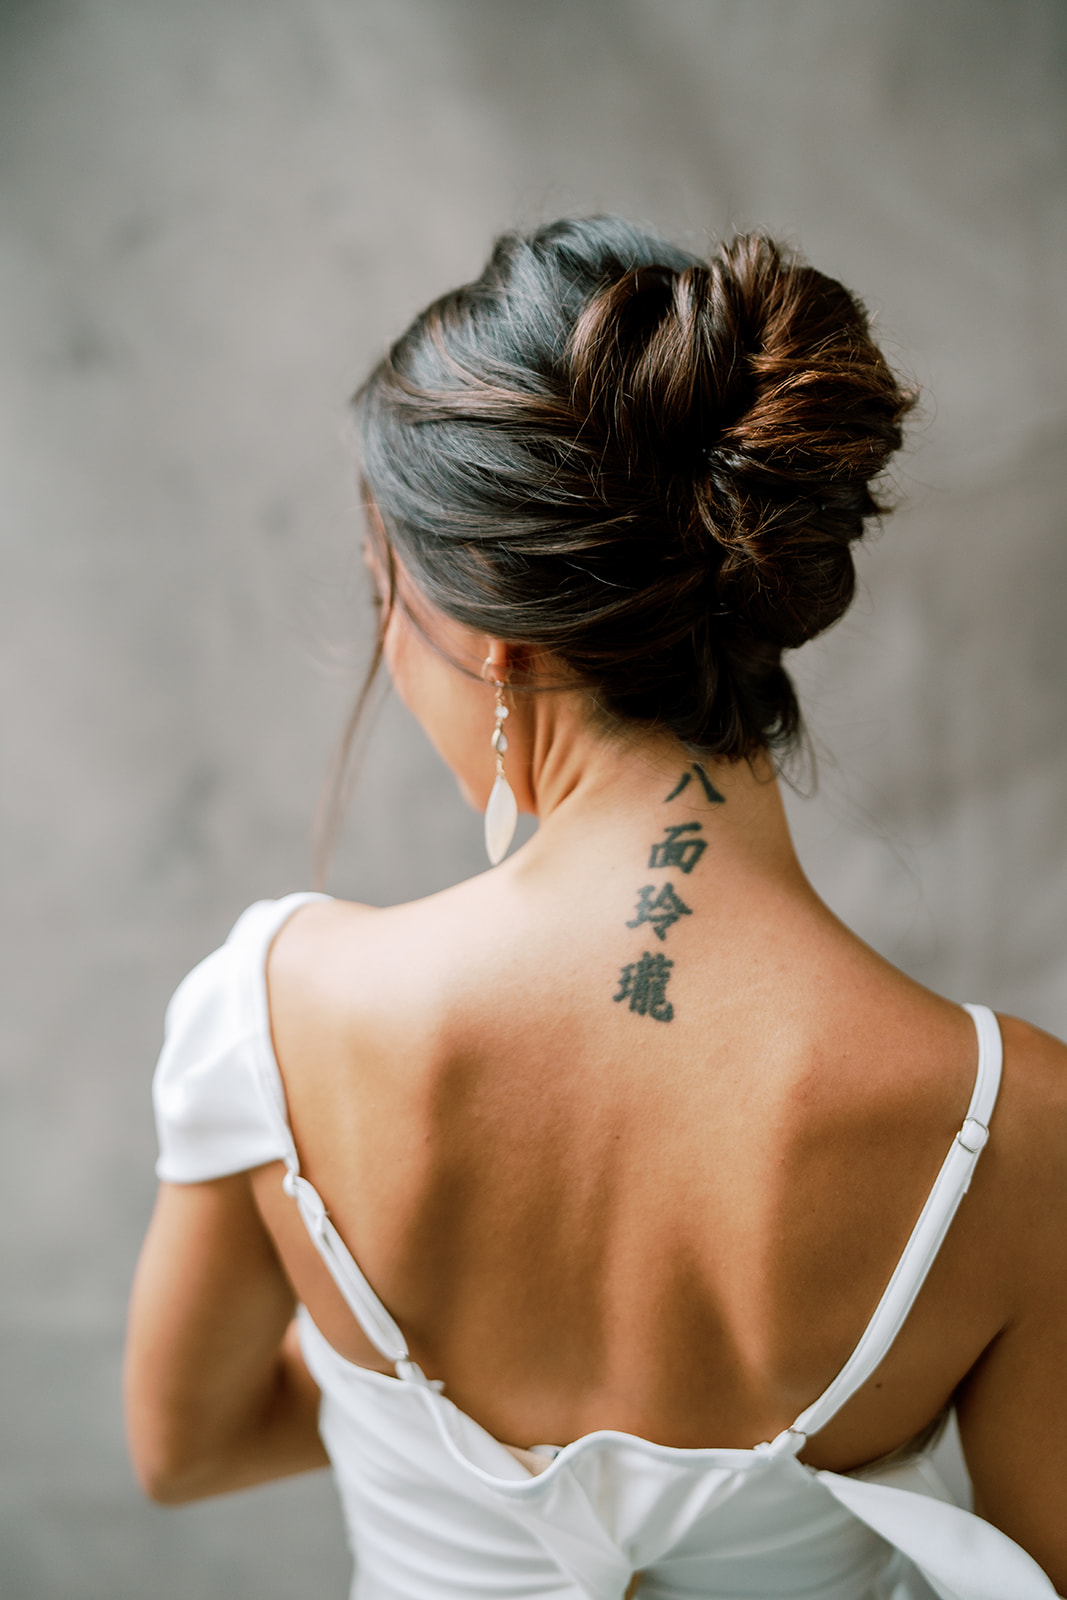 A woman with her hair tied up high and a chinese tattoo on her back.